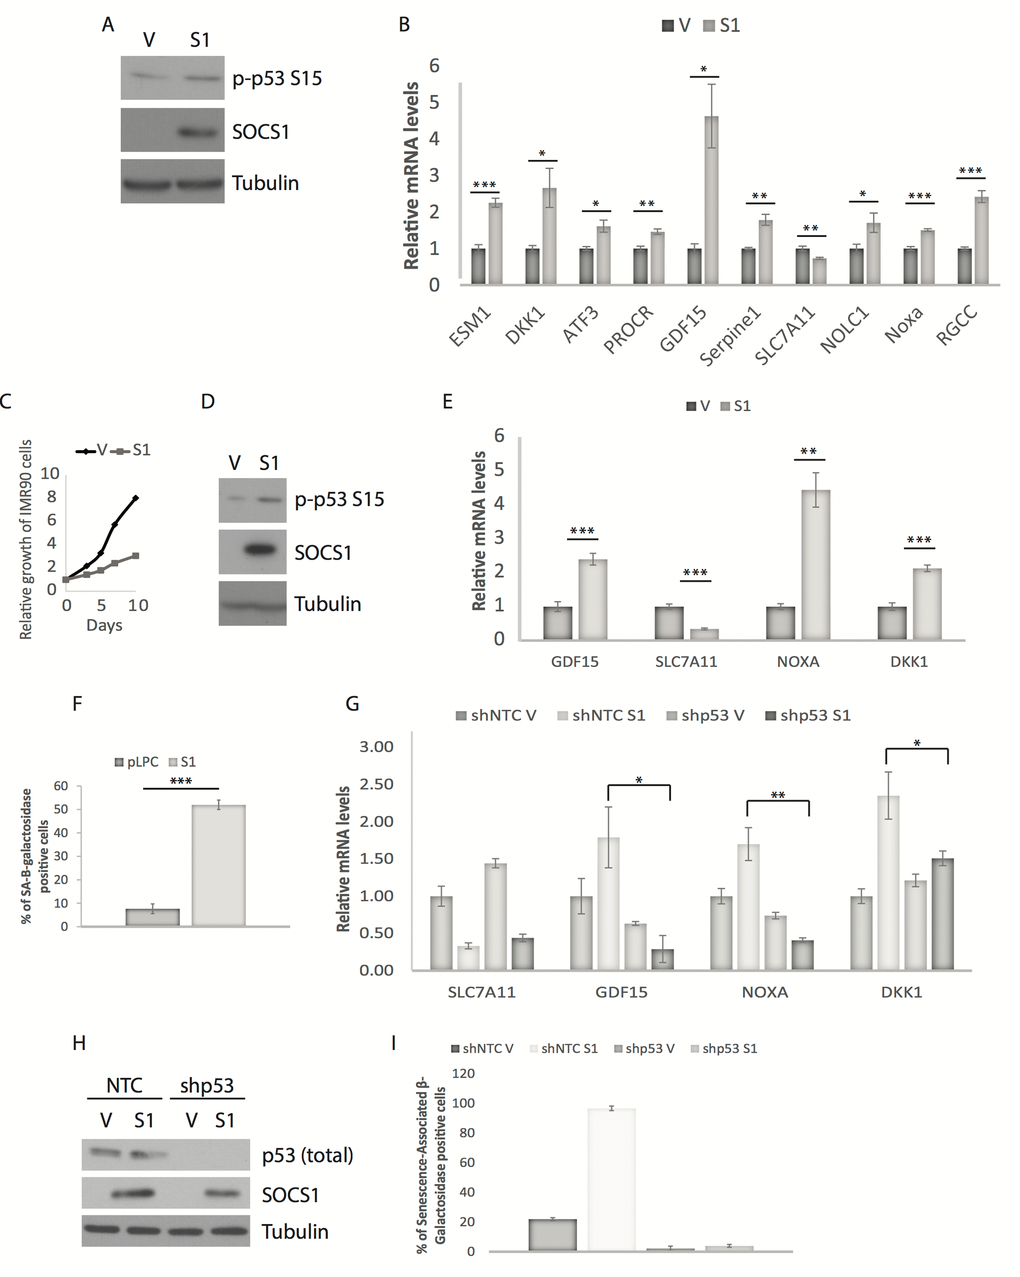 SOCS1 overexpression is sufficient to regulate the expression of SOCS1-dependent p53 target genes. (A) Western blots of SOCS1 and phospho-p53 (p-p53 S15) in U2OS cells expressing either empty vector (V) or SOCS1 (S1). (B) QPCR for p53 target genes in cells as in (A). Cells were collected at day 5 or 7 post-infection. (C) Growth curves of IMR90 cells expressing either empty vector (V) or SOCS1 (S1). (D) Western blots of SOCS1 and phospho-p53 (p-p53 S15) in IMR90 cells expressing either empty vector (V) or SOCS1 (S1). (E) QPCR for p53 target genes in cells as in (C). Cells were collected at day-7 post infection. (F) Senescence associated β-galactosidase of IMR90 cells expressing either empty vector (V) or SOCS1 (S1). Cells were fixed and stained at day 12 post- infection. (G) QPCR of IMR90 cells expressing either a control shRNA (shNTC) or a shRNA against p53 (shp53) combined with SOCS1 (S1) or empty vector (V) to confirm that the genes in (E) are targets of p53. (H) Western blots for the indicated proteins in IMR90 cells expressing a control shRNA (NTC) or an shRNA against p53 (shp53) and also infected with a SOCS1 expressing vector (S1) or a vector control (V). (I) Senescence-Associated β-Galactosidase staining. Positively stained and unstained cells were counted under a light microscope in order to obtain the percentage of senescent cells. All experiments were performed three times, error bars indicate the standard errors of triplicates, * = p